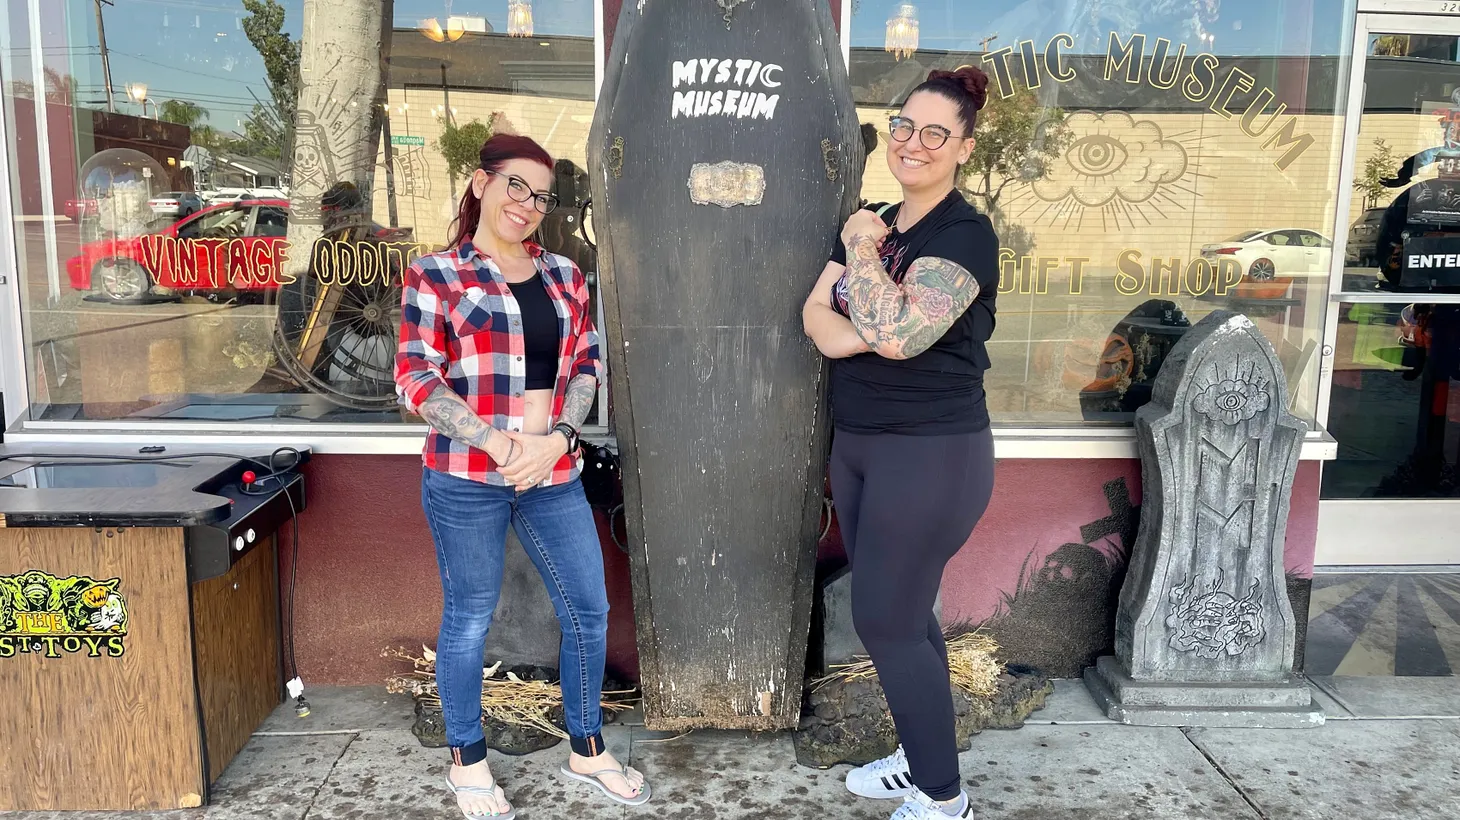 Elizabeth Williams (left) and Shelby Brown came to Burbank to do their spooky shopping at the Mystic Museum, a horror and oddities shop.